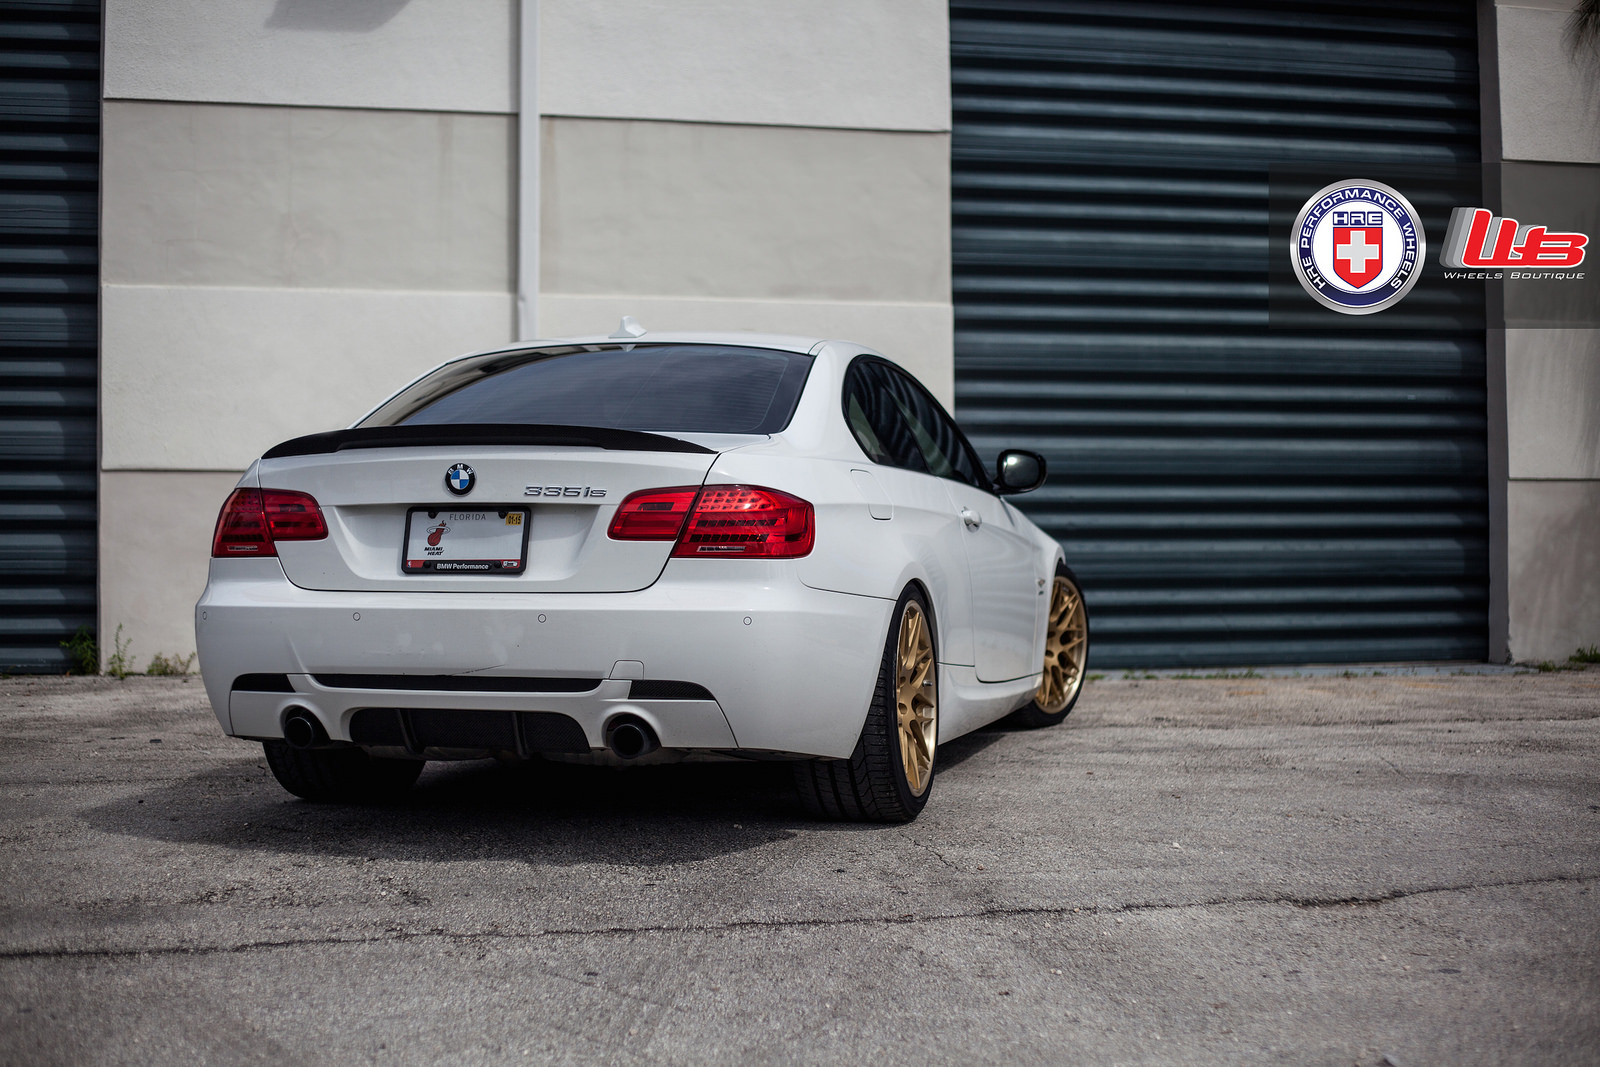 Classic Looking Alpine White BMW 335is With HRE Wheels